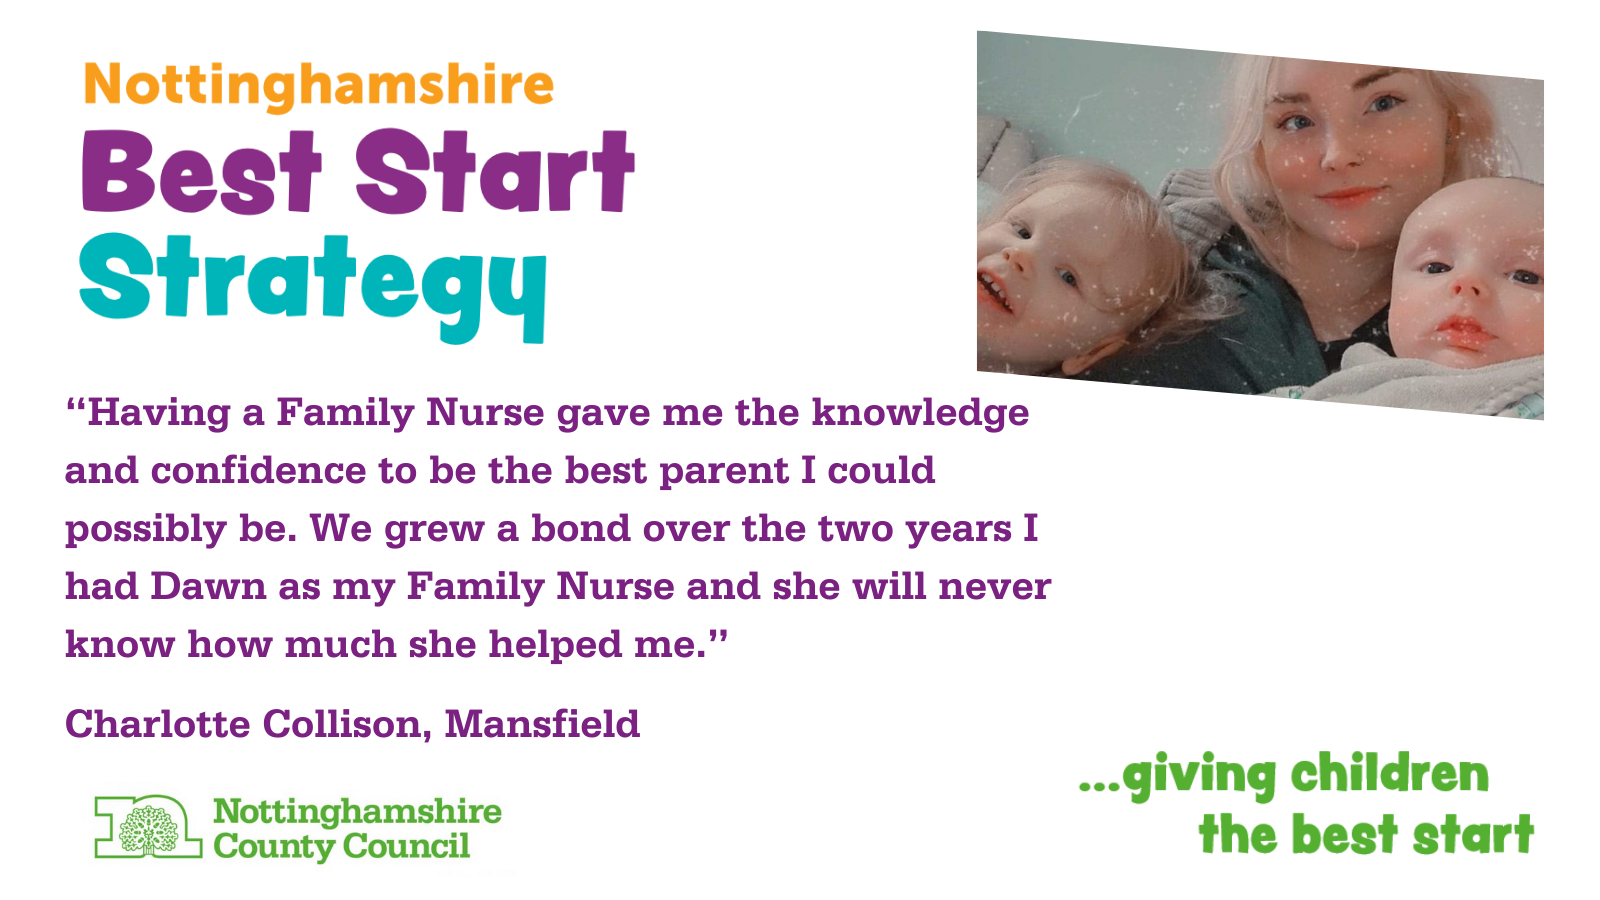 Nottinghamshire Best Start Strategy "Having a Family Nurse gave me the knowledge and confidence to be the best parent I could possibly be. We grew a bond over the two years I had Dawn as my Family Nurse and she will never know how much she helped me." Charlotte Collison, Mansfield